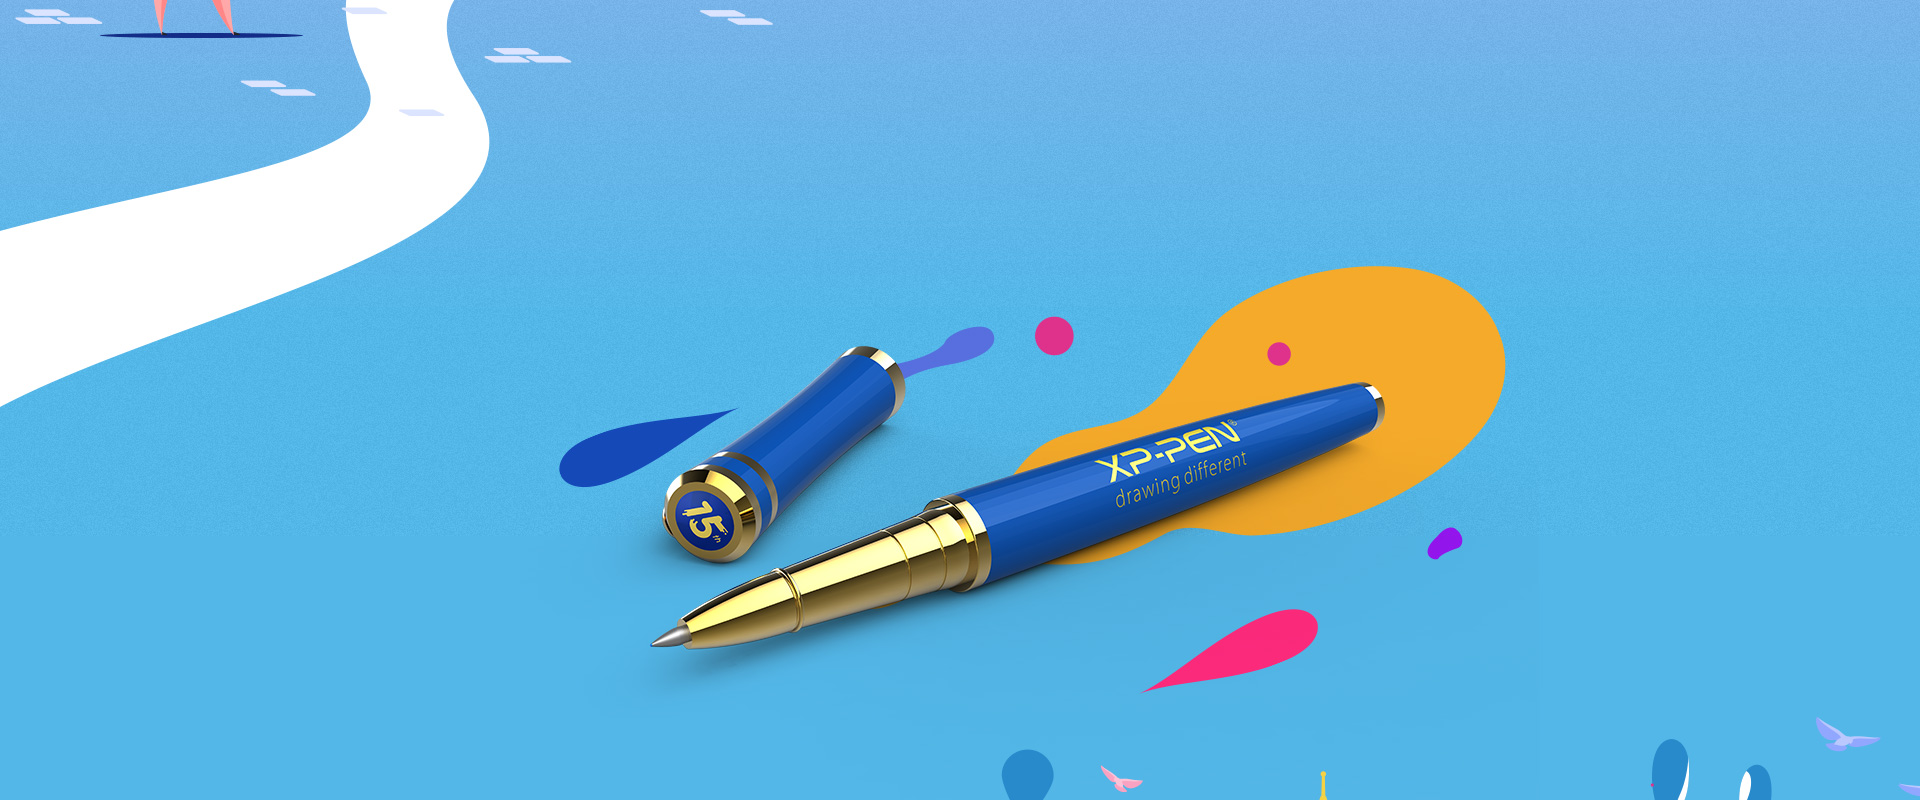 Reveal your creativity With the XP-PEN Branding Blue Pen